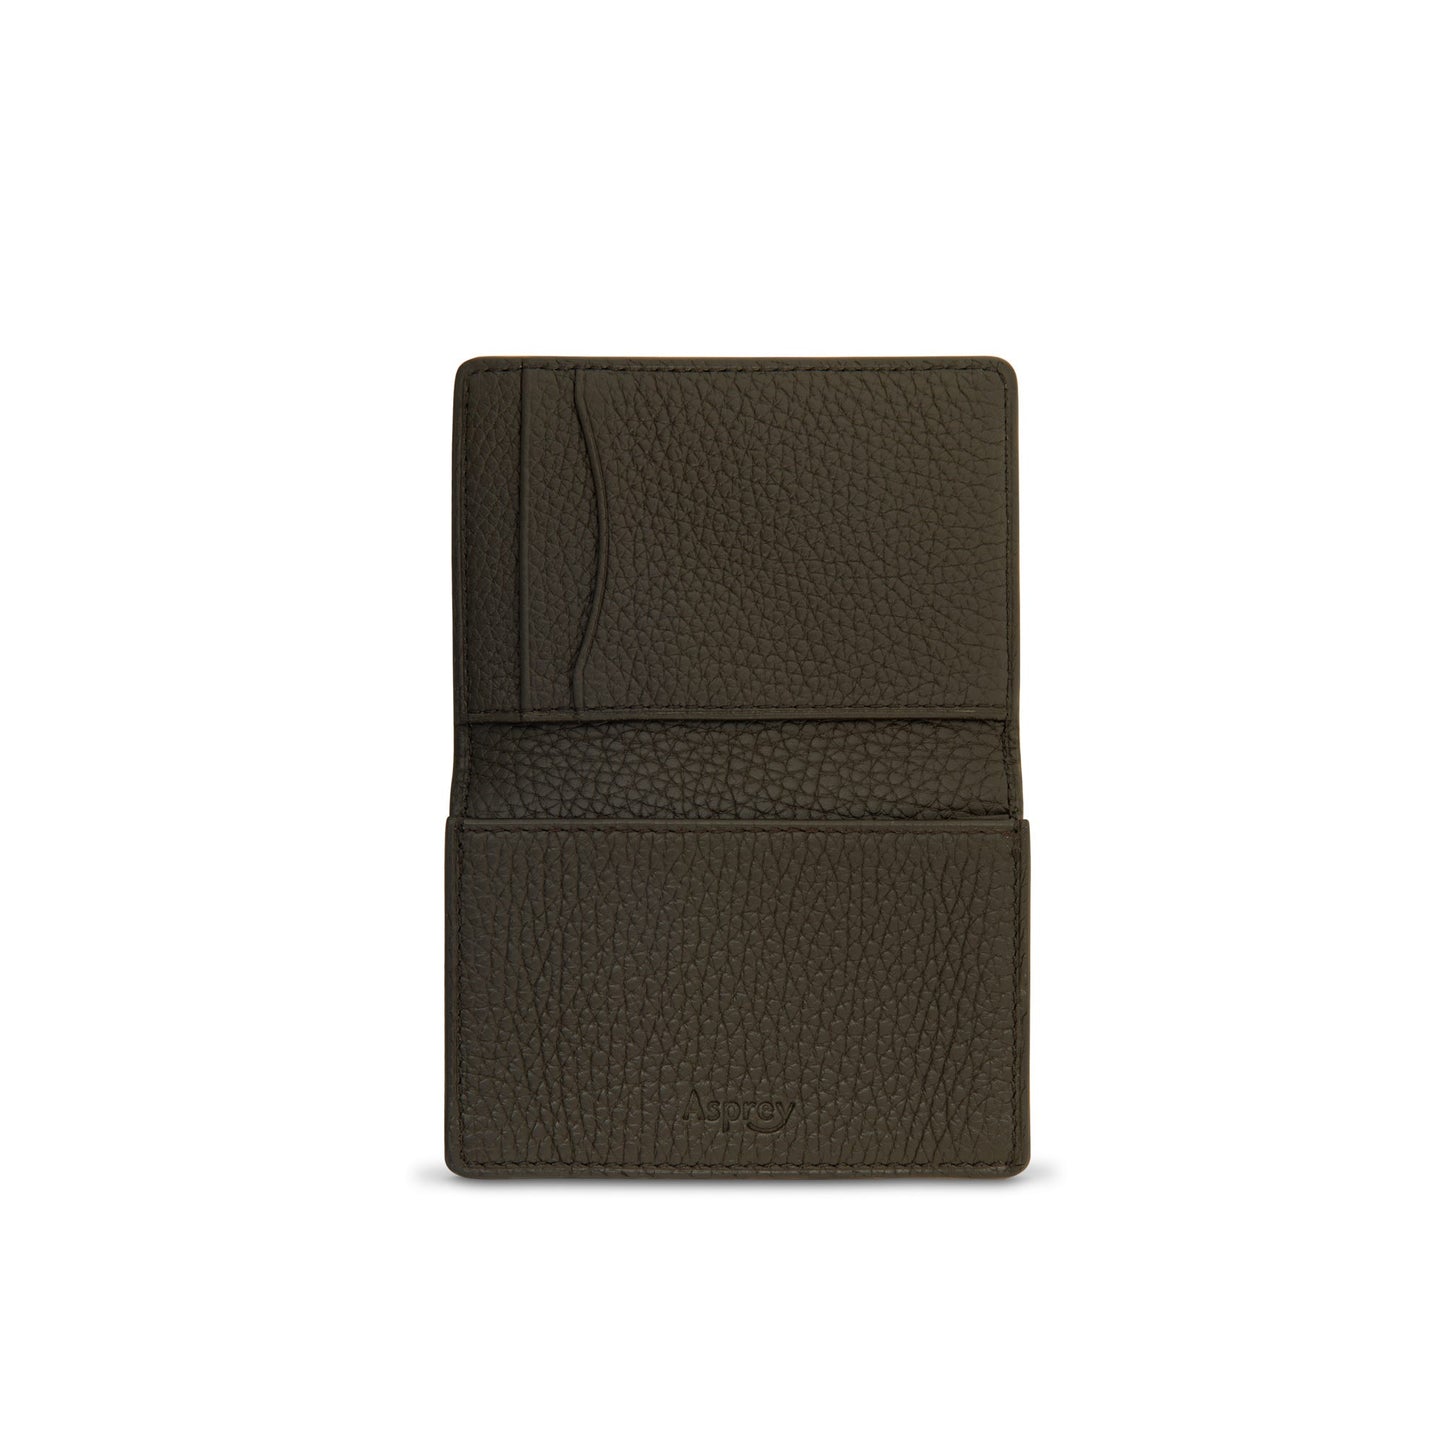 GMT Folding Card Holder in Soft Grain Leather